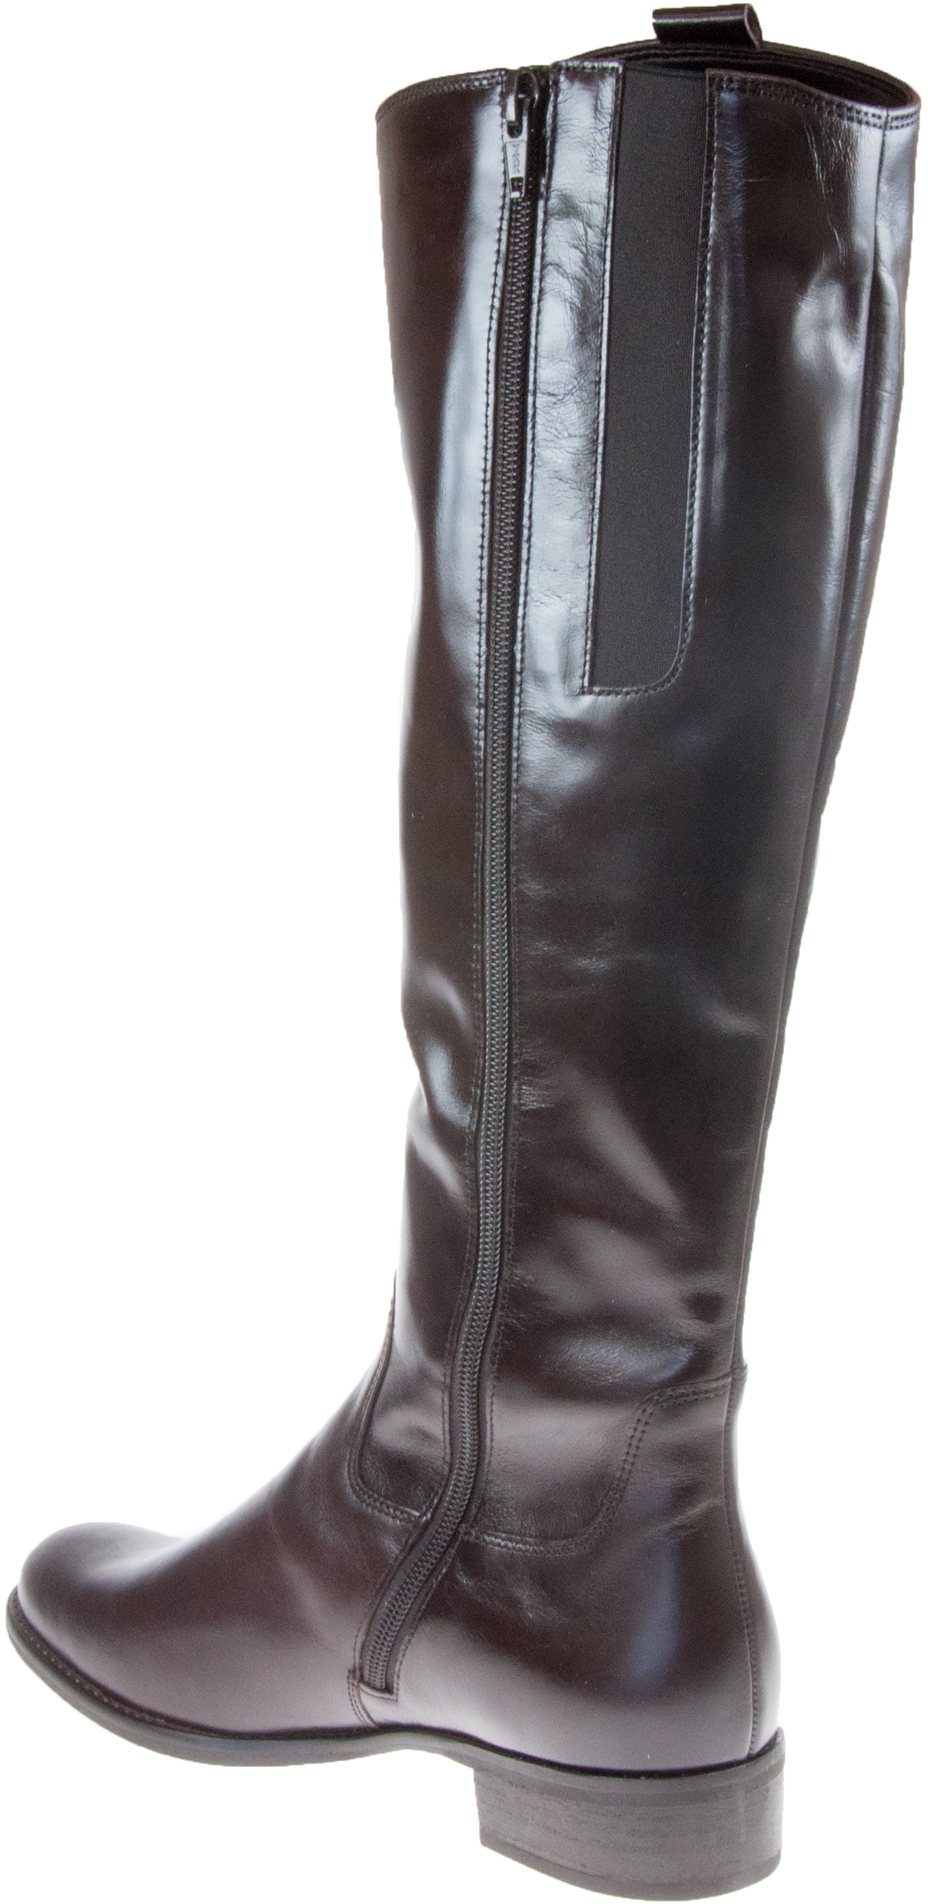 Gabor Brook S Espresso 71.648.28 - Knee High Boots - Humphries Shoes